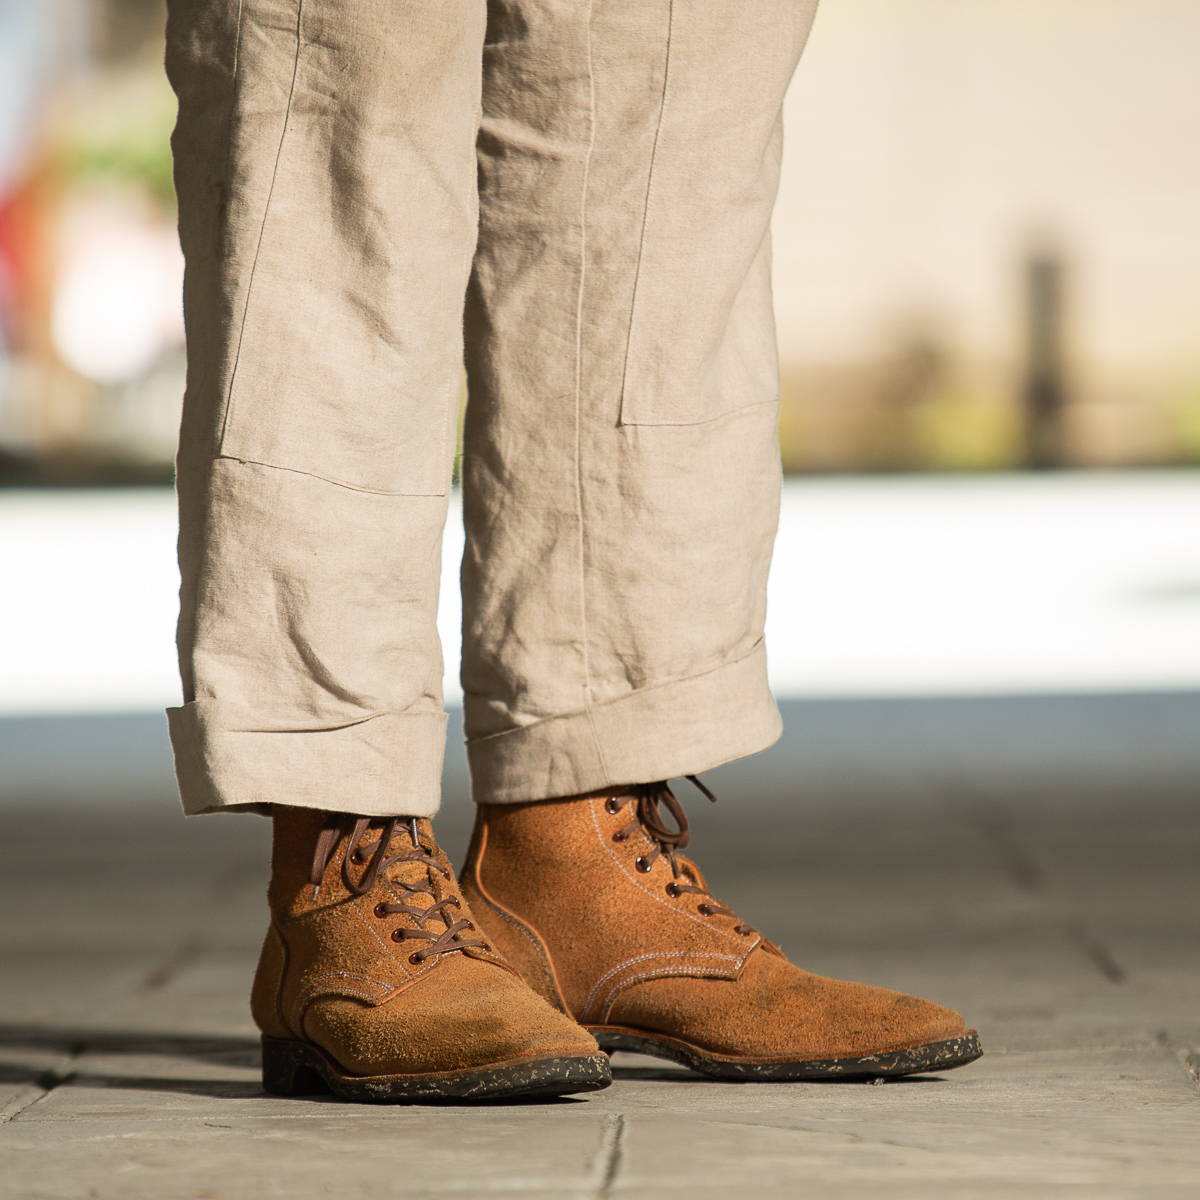 Clinch Yeager Boots in Natural Roughout Deep Dive - Standard & Strange